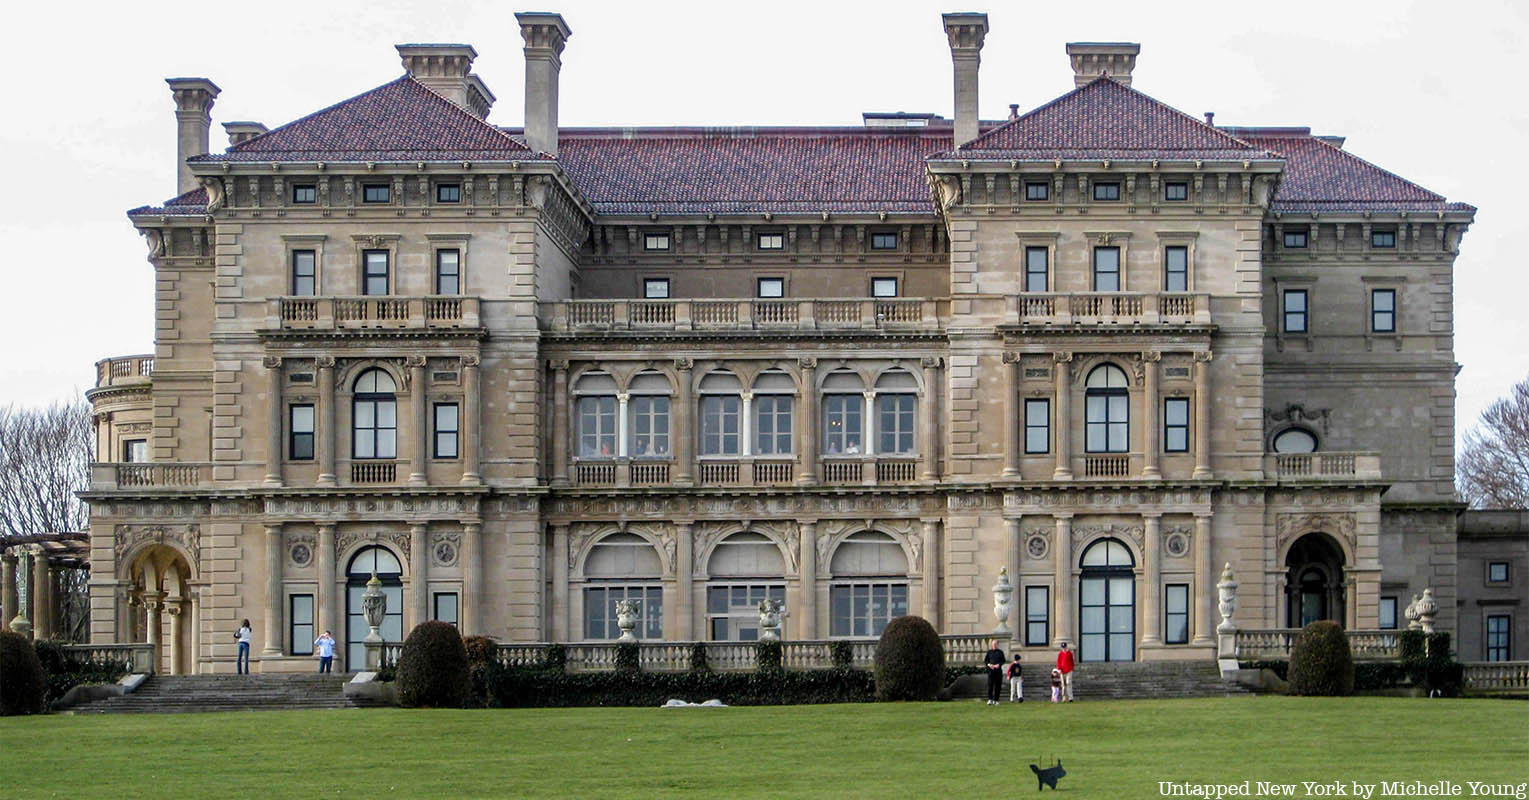 The Breakers Mansion in Newport